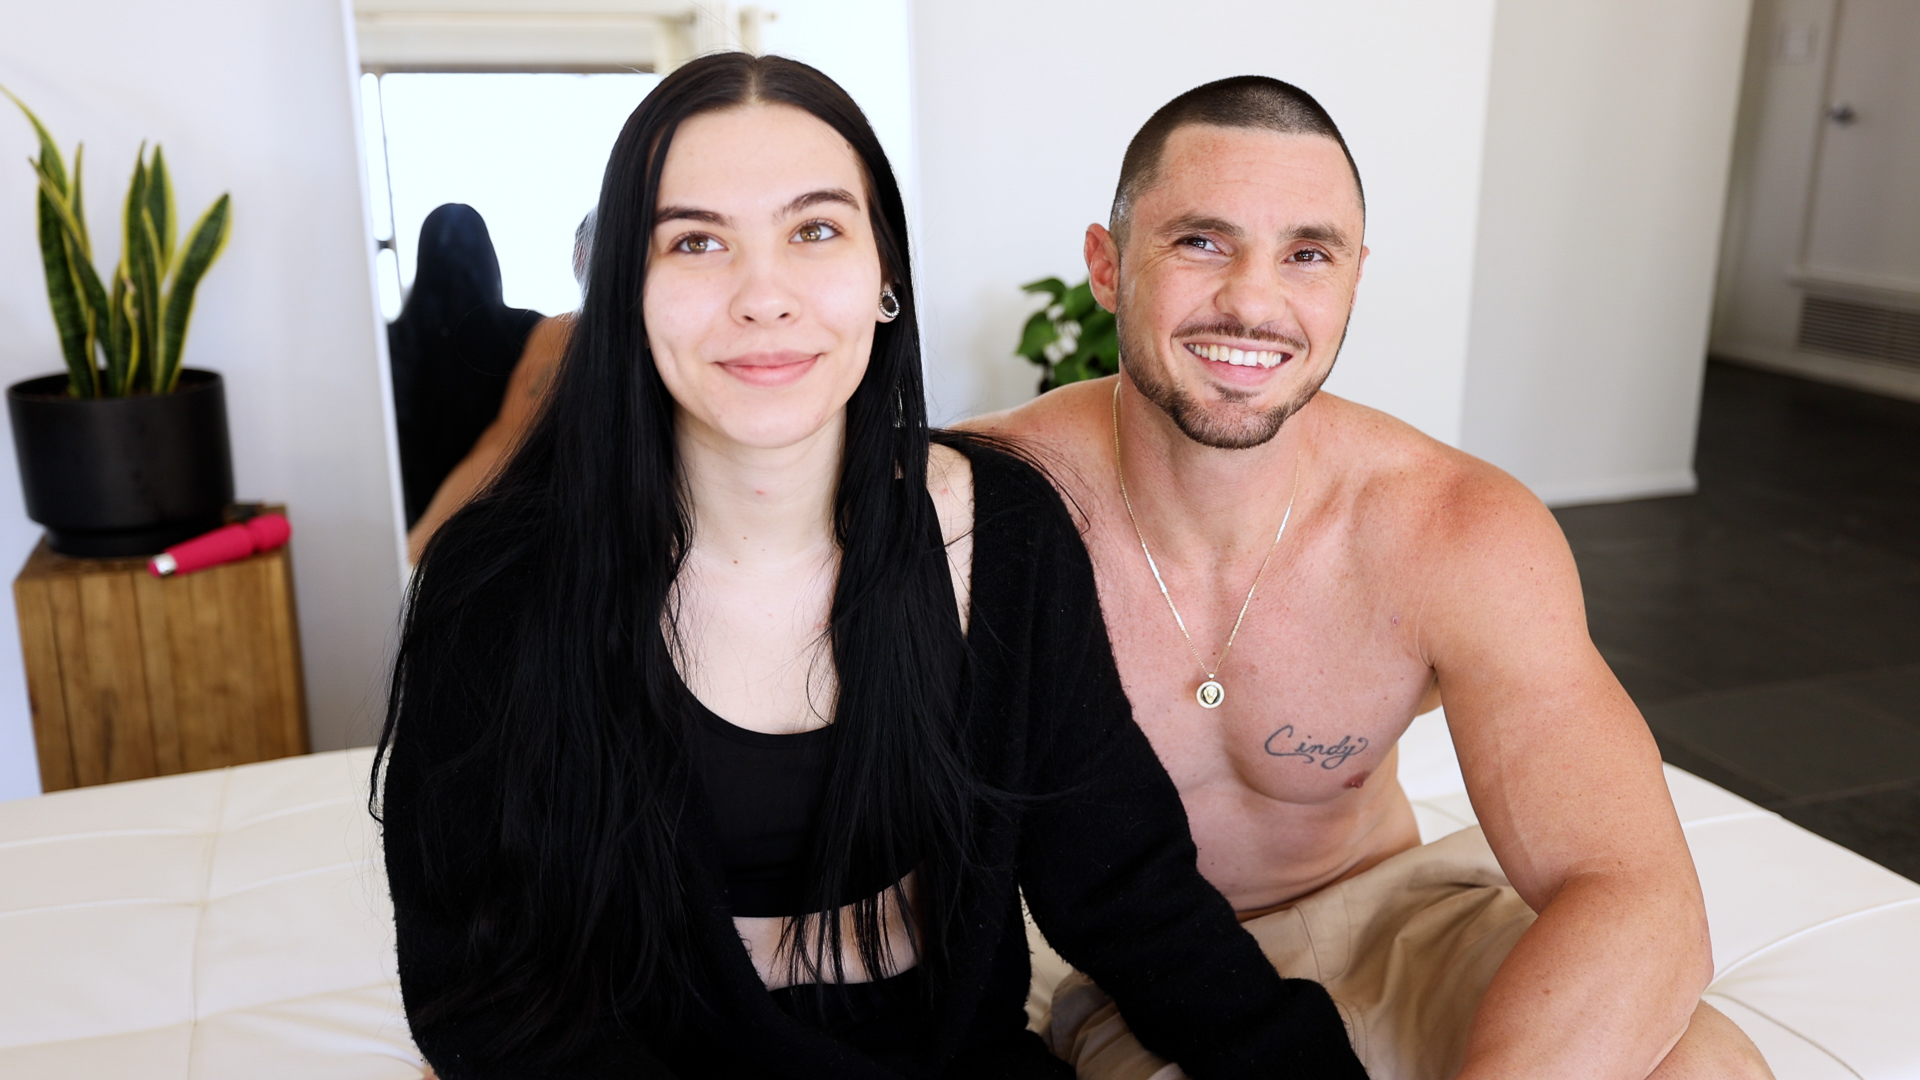 New Guy Leo Gotti Can't Wait For Hottie With The Body Alyssa Amythest at  HotGuysFuck